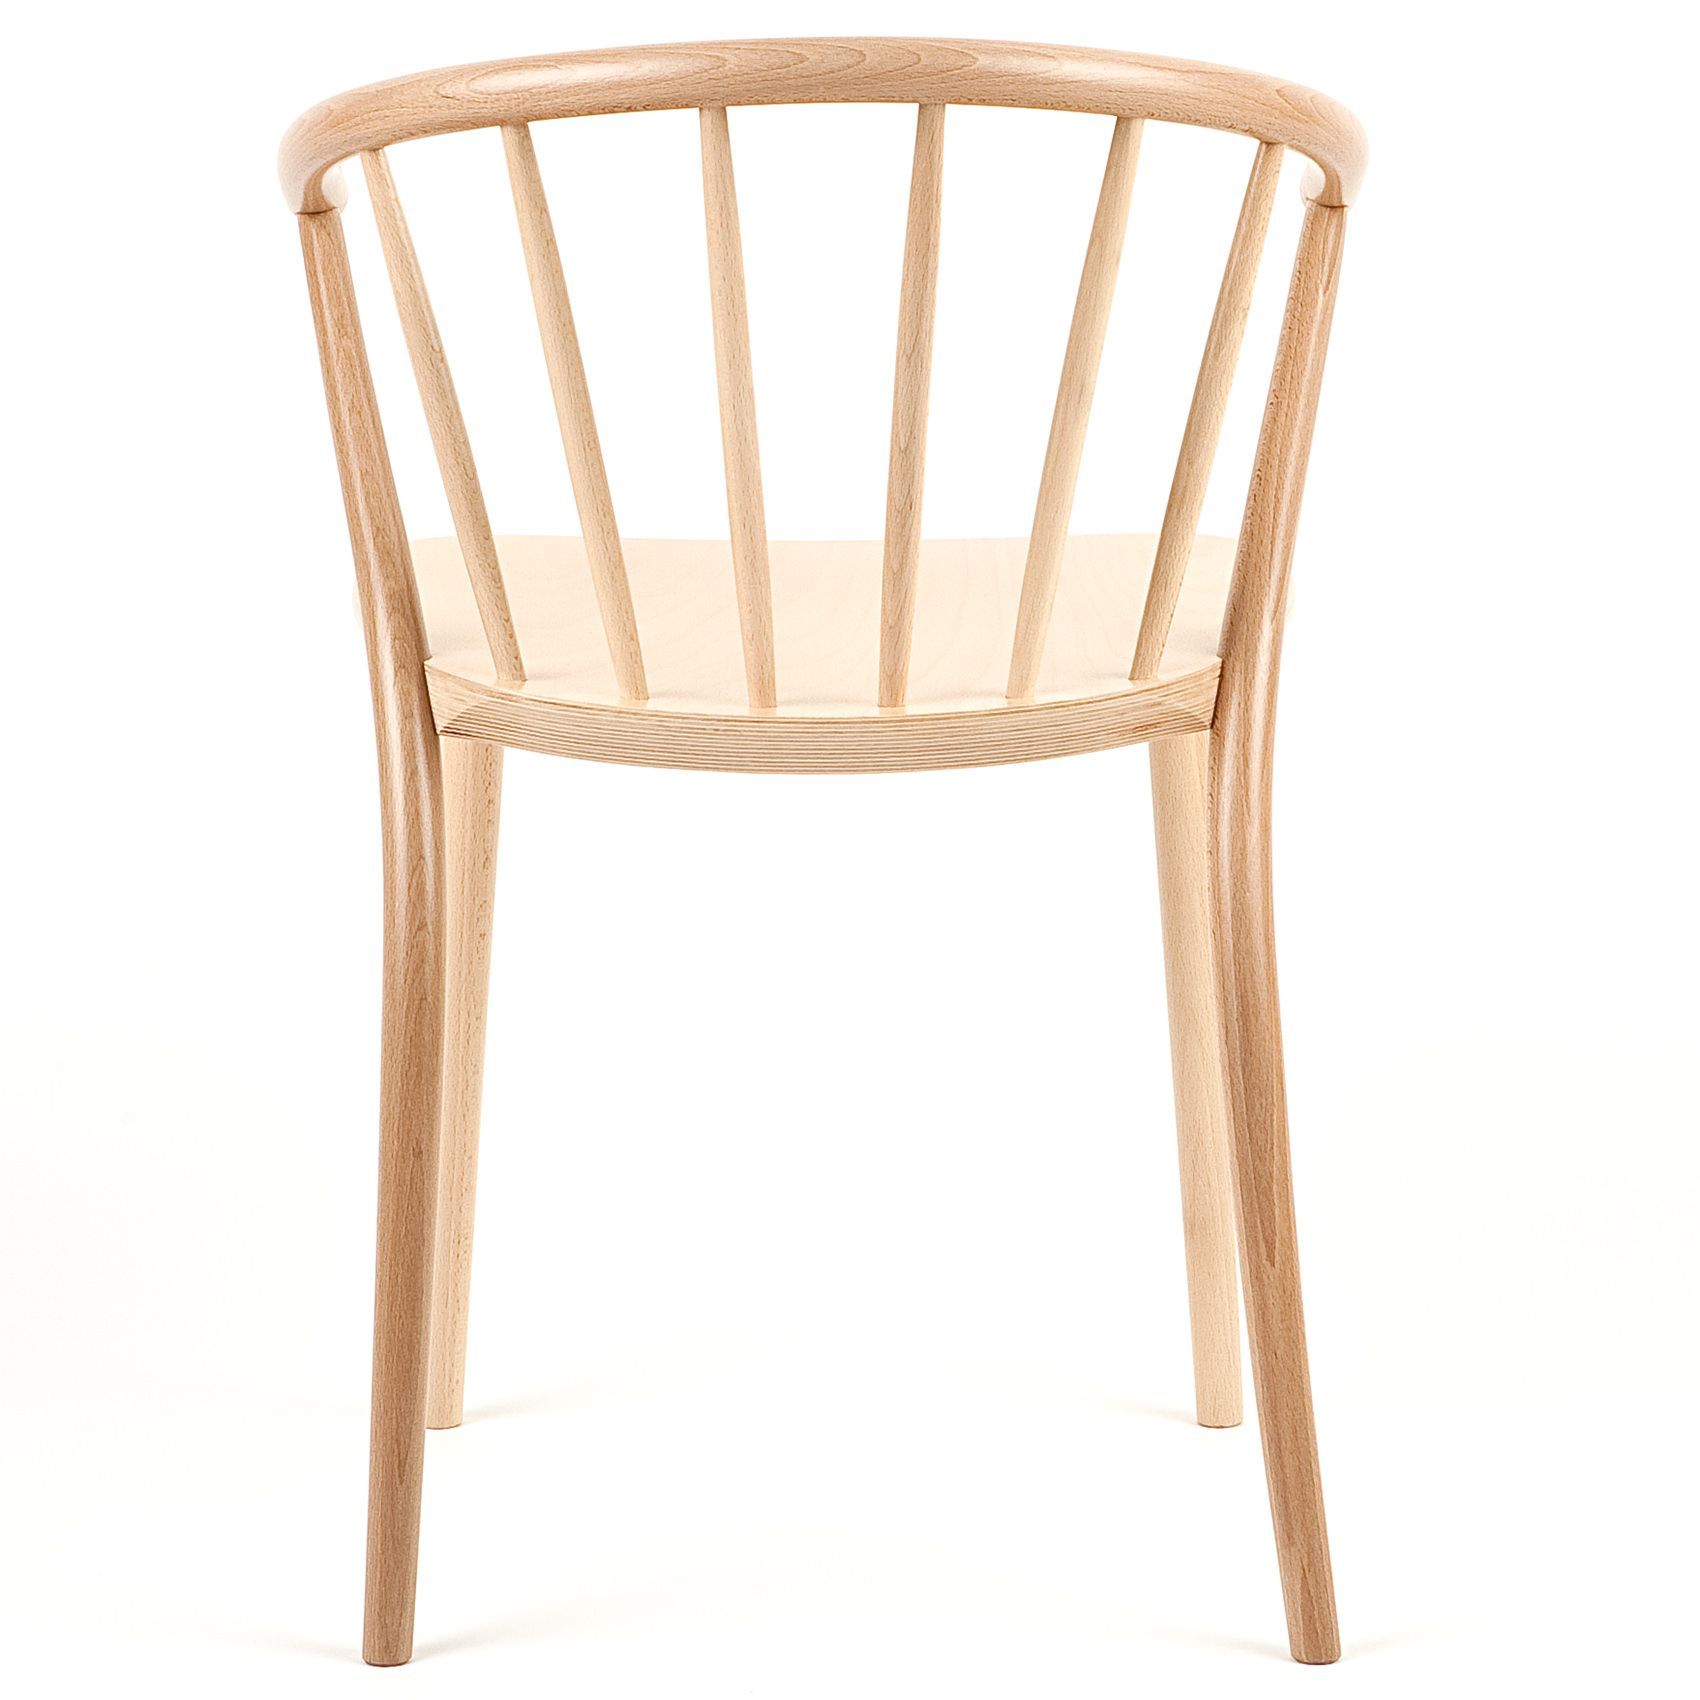 Chair B-9820 SUDOKU by Paged